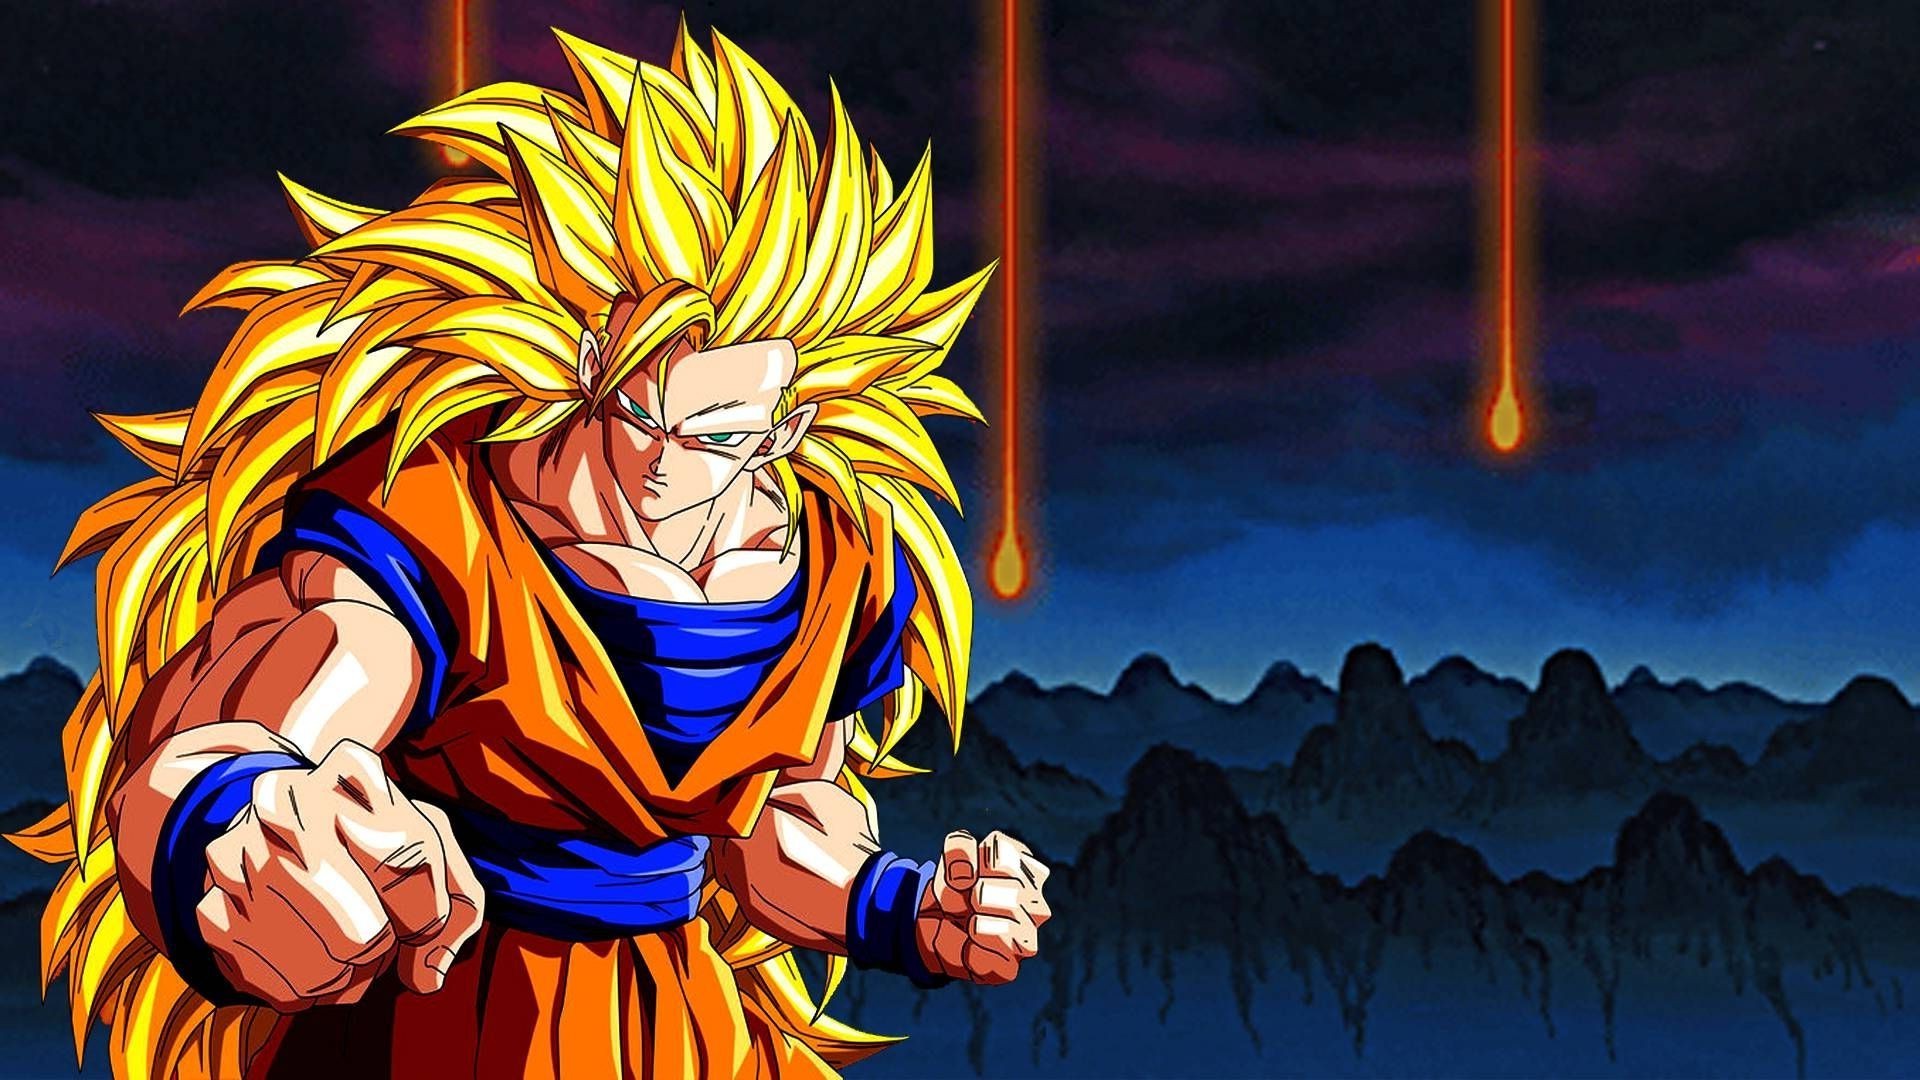 Goku SSJ3 HD Wallpaper With Resolution 1920X1080 pixel. You can make this wallpaper for your Desktop Computer Backgrounds, Mac Wallpapers, Android Lock screen or iPhone Screensavers